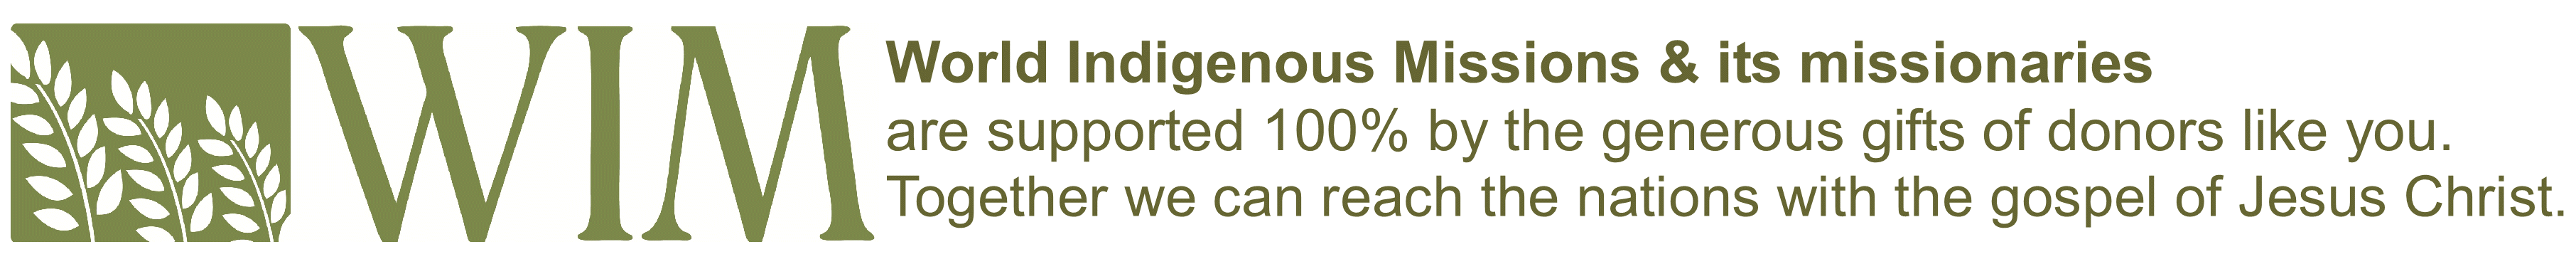 World Indigenous Missions